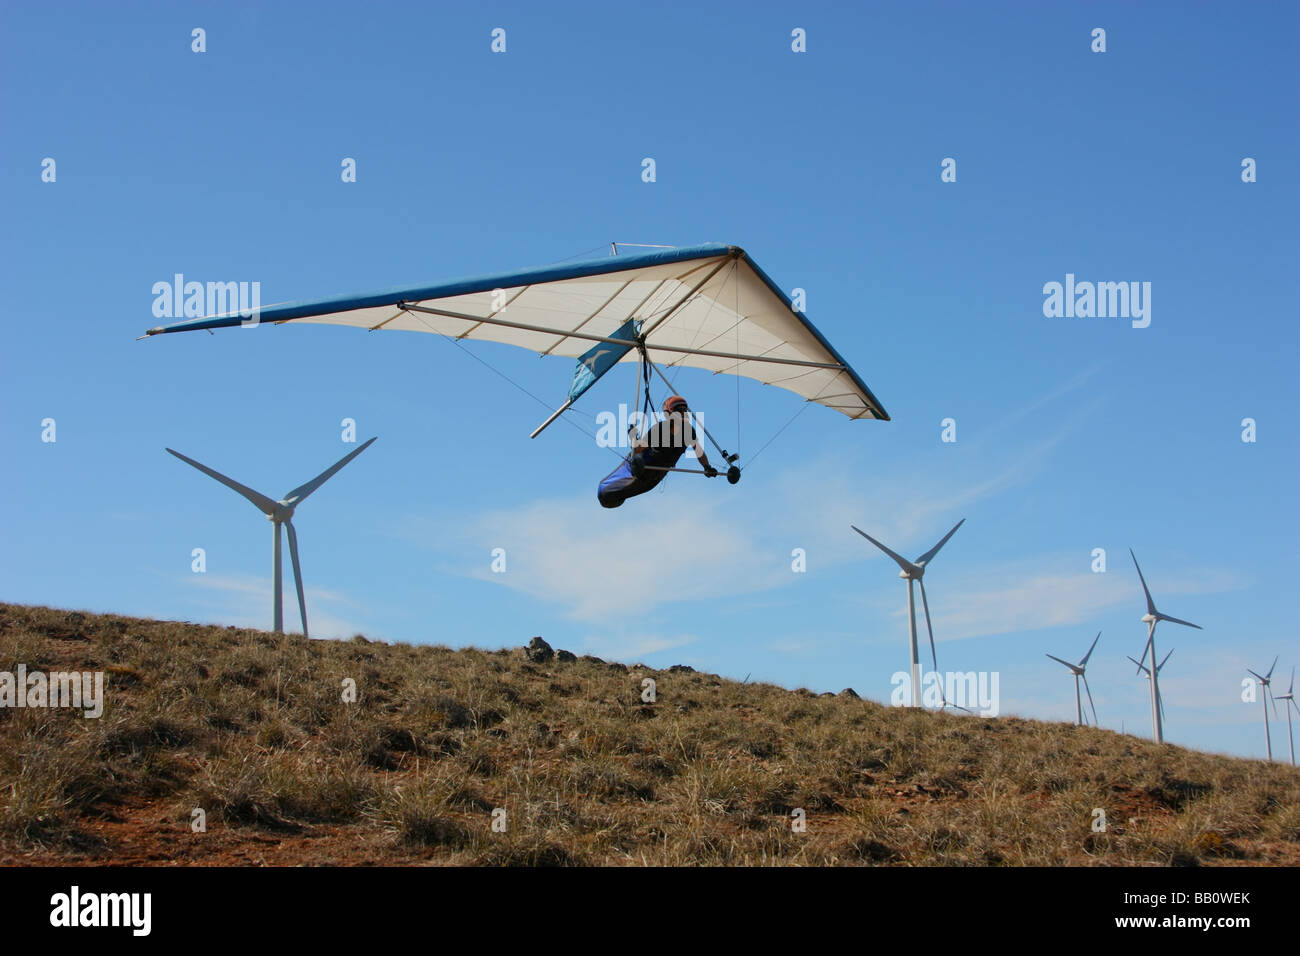 A hang glider banks to the left  in south Australia Stock Photo